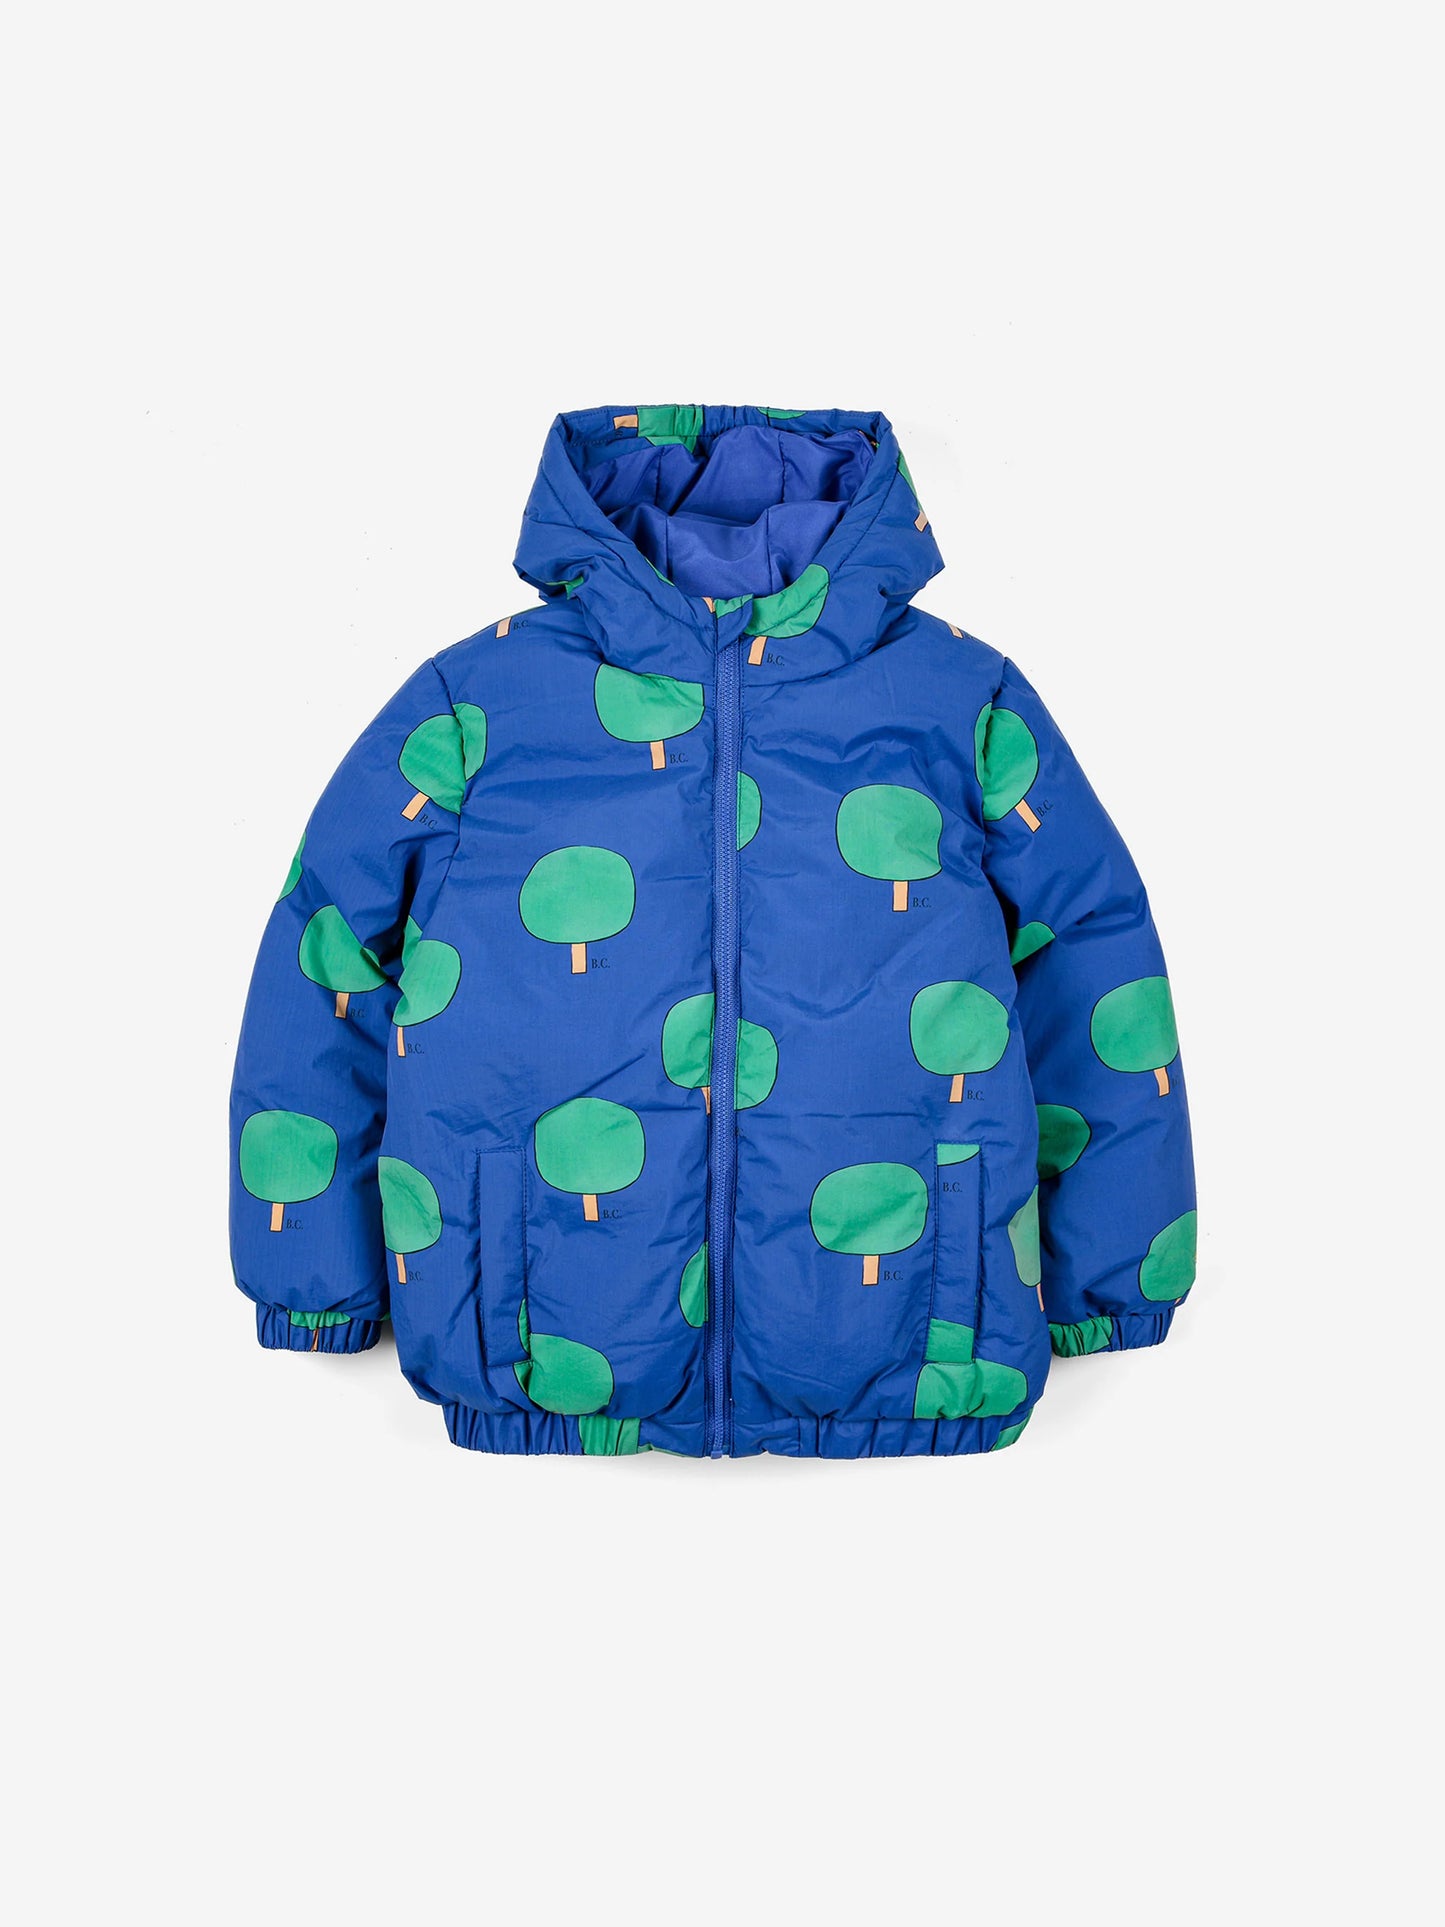 Green Tree all over anorak